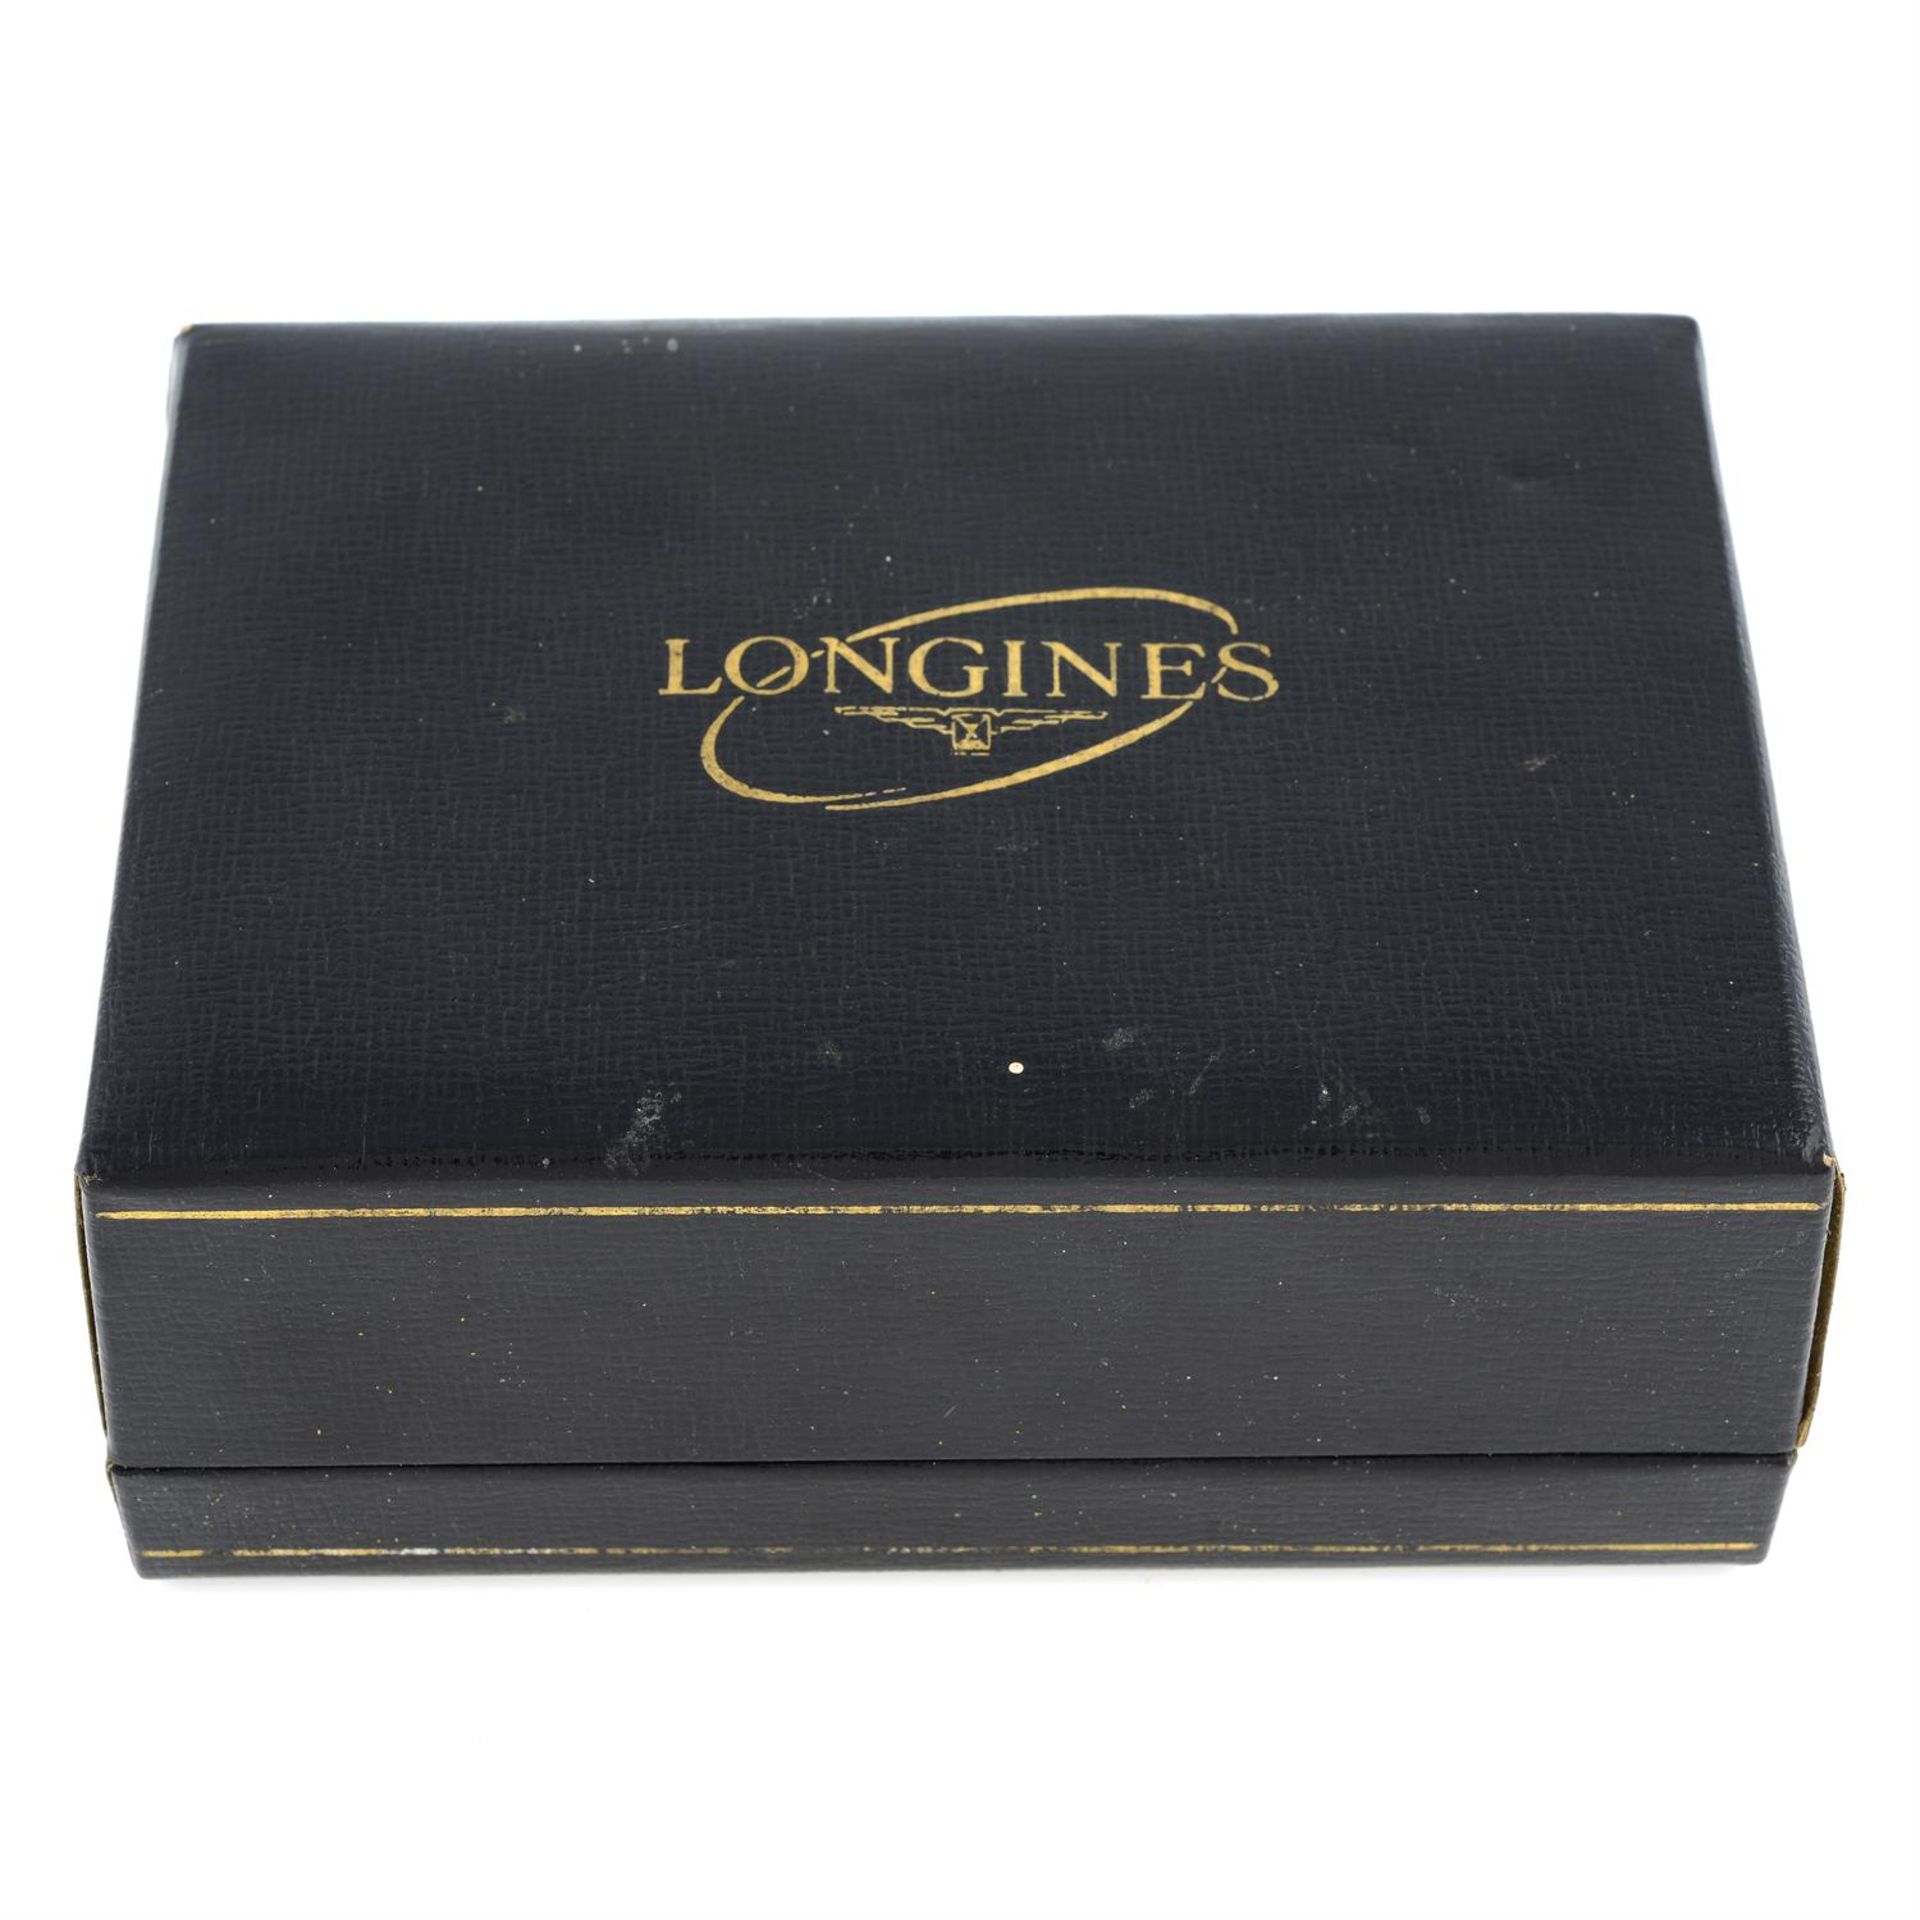 Longines - an Admiral watch, 34mm. - Image 6 of 6